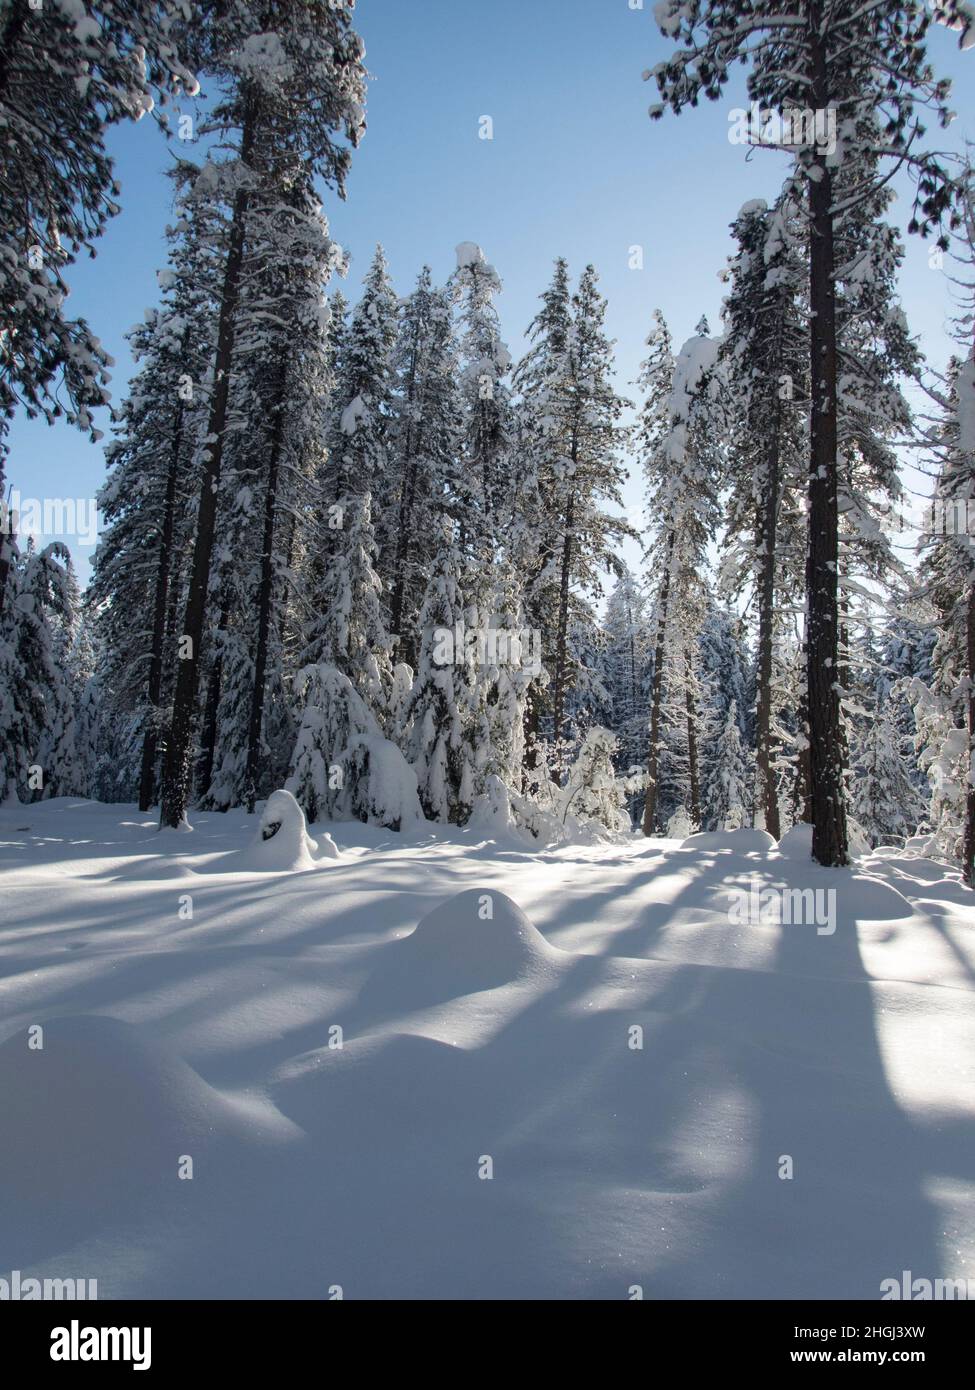 A winter scene with the snow-covered forest at Lake Wenatchee State Park in eastern Washington State, USA. Stock Photo